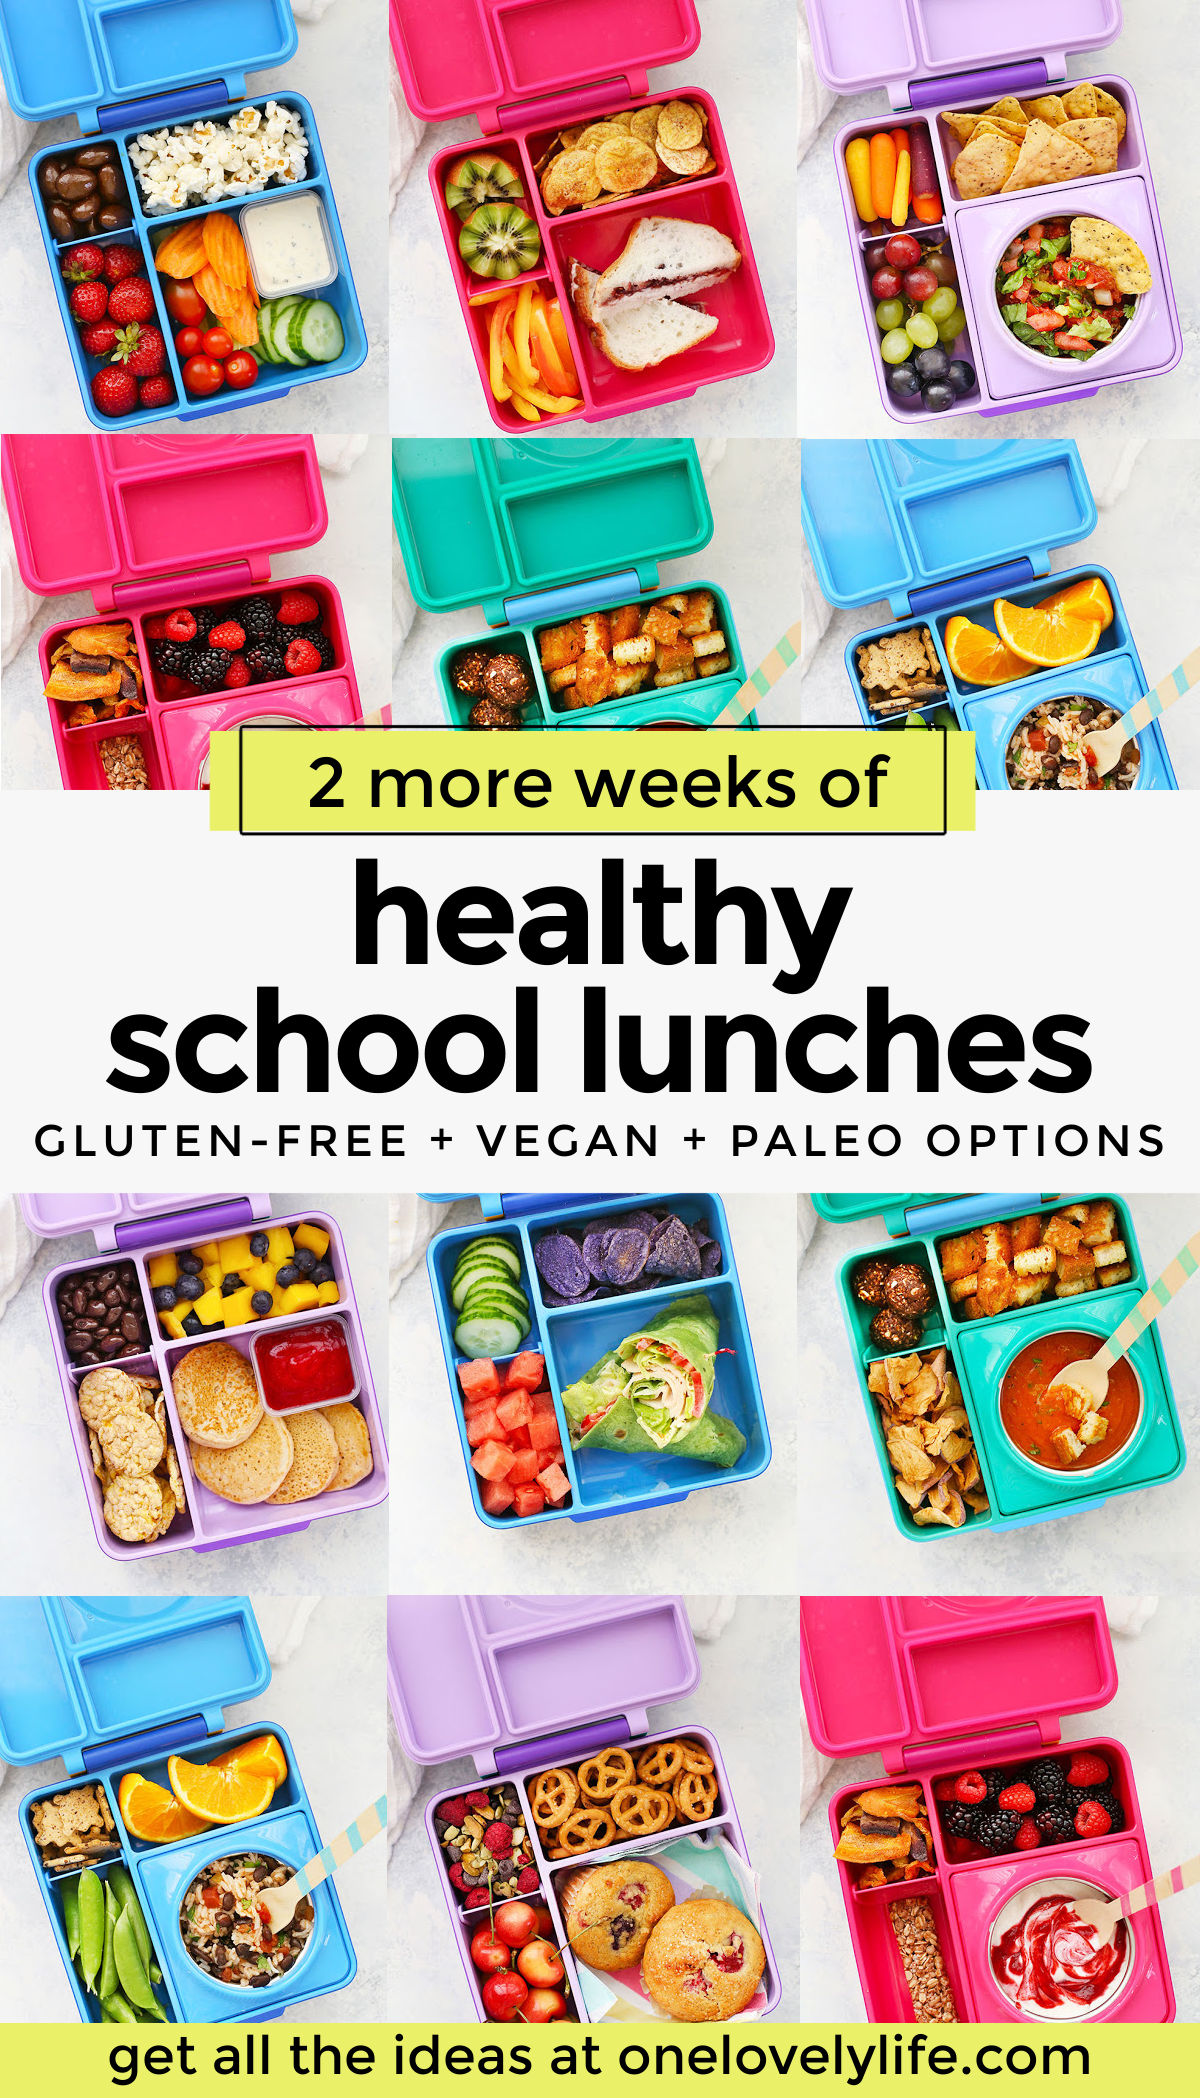 2 Weeks of Healthy School Lunches! These gluten free, dairy free school lunch ideas are all kid-tested and DELICIOUS! // School lunches // school lunch ideas // gluten free school lunches // dairy free school lunches // vegan school lunches, paleo school lunches // gluten free packed lunches // healthy packed lunches // healthy school lunch // healthy kids lunches